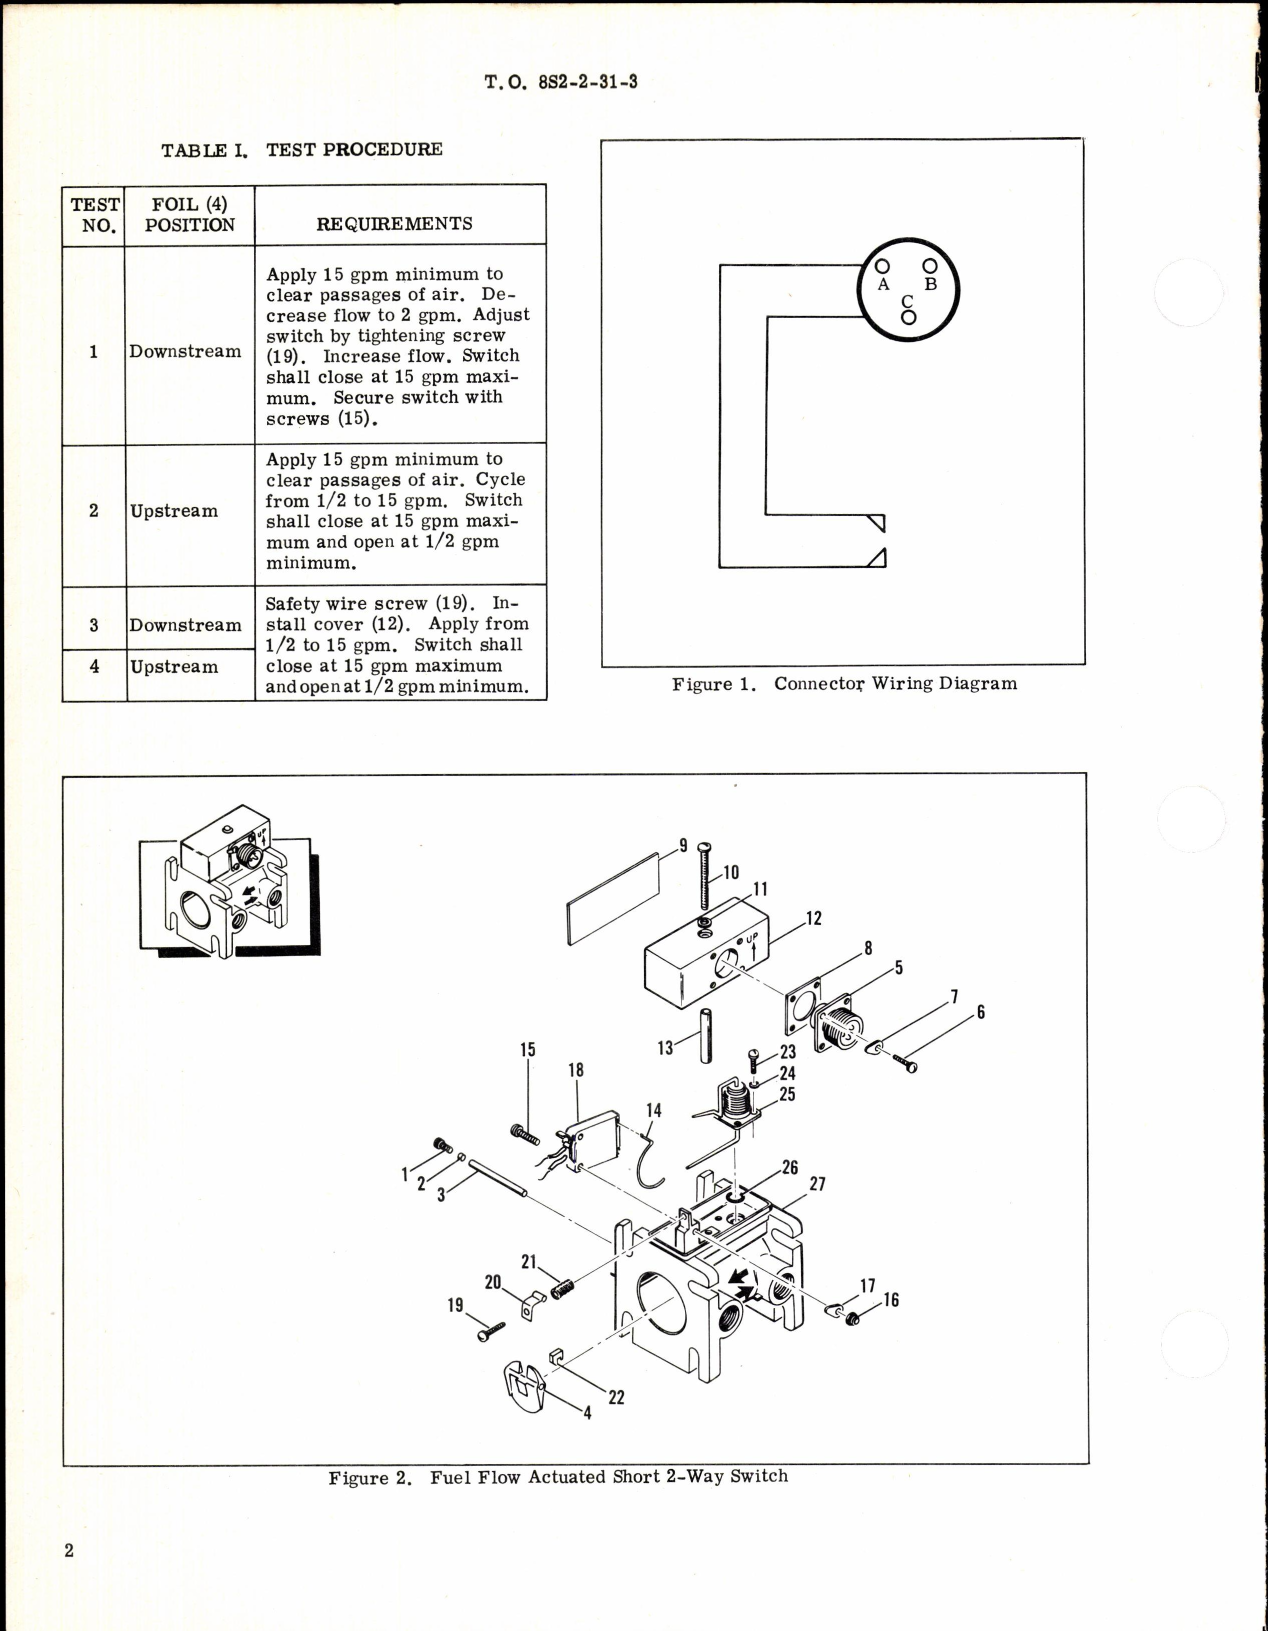 Sample page 2 from AirCorps Library document: Fuel Flow Actuated Short 2-Way Switch Part No 925